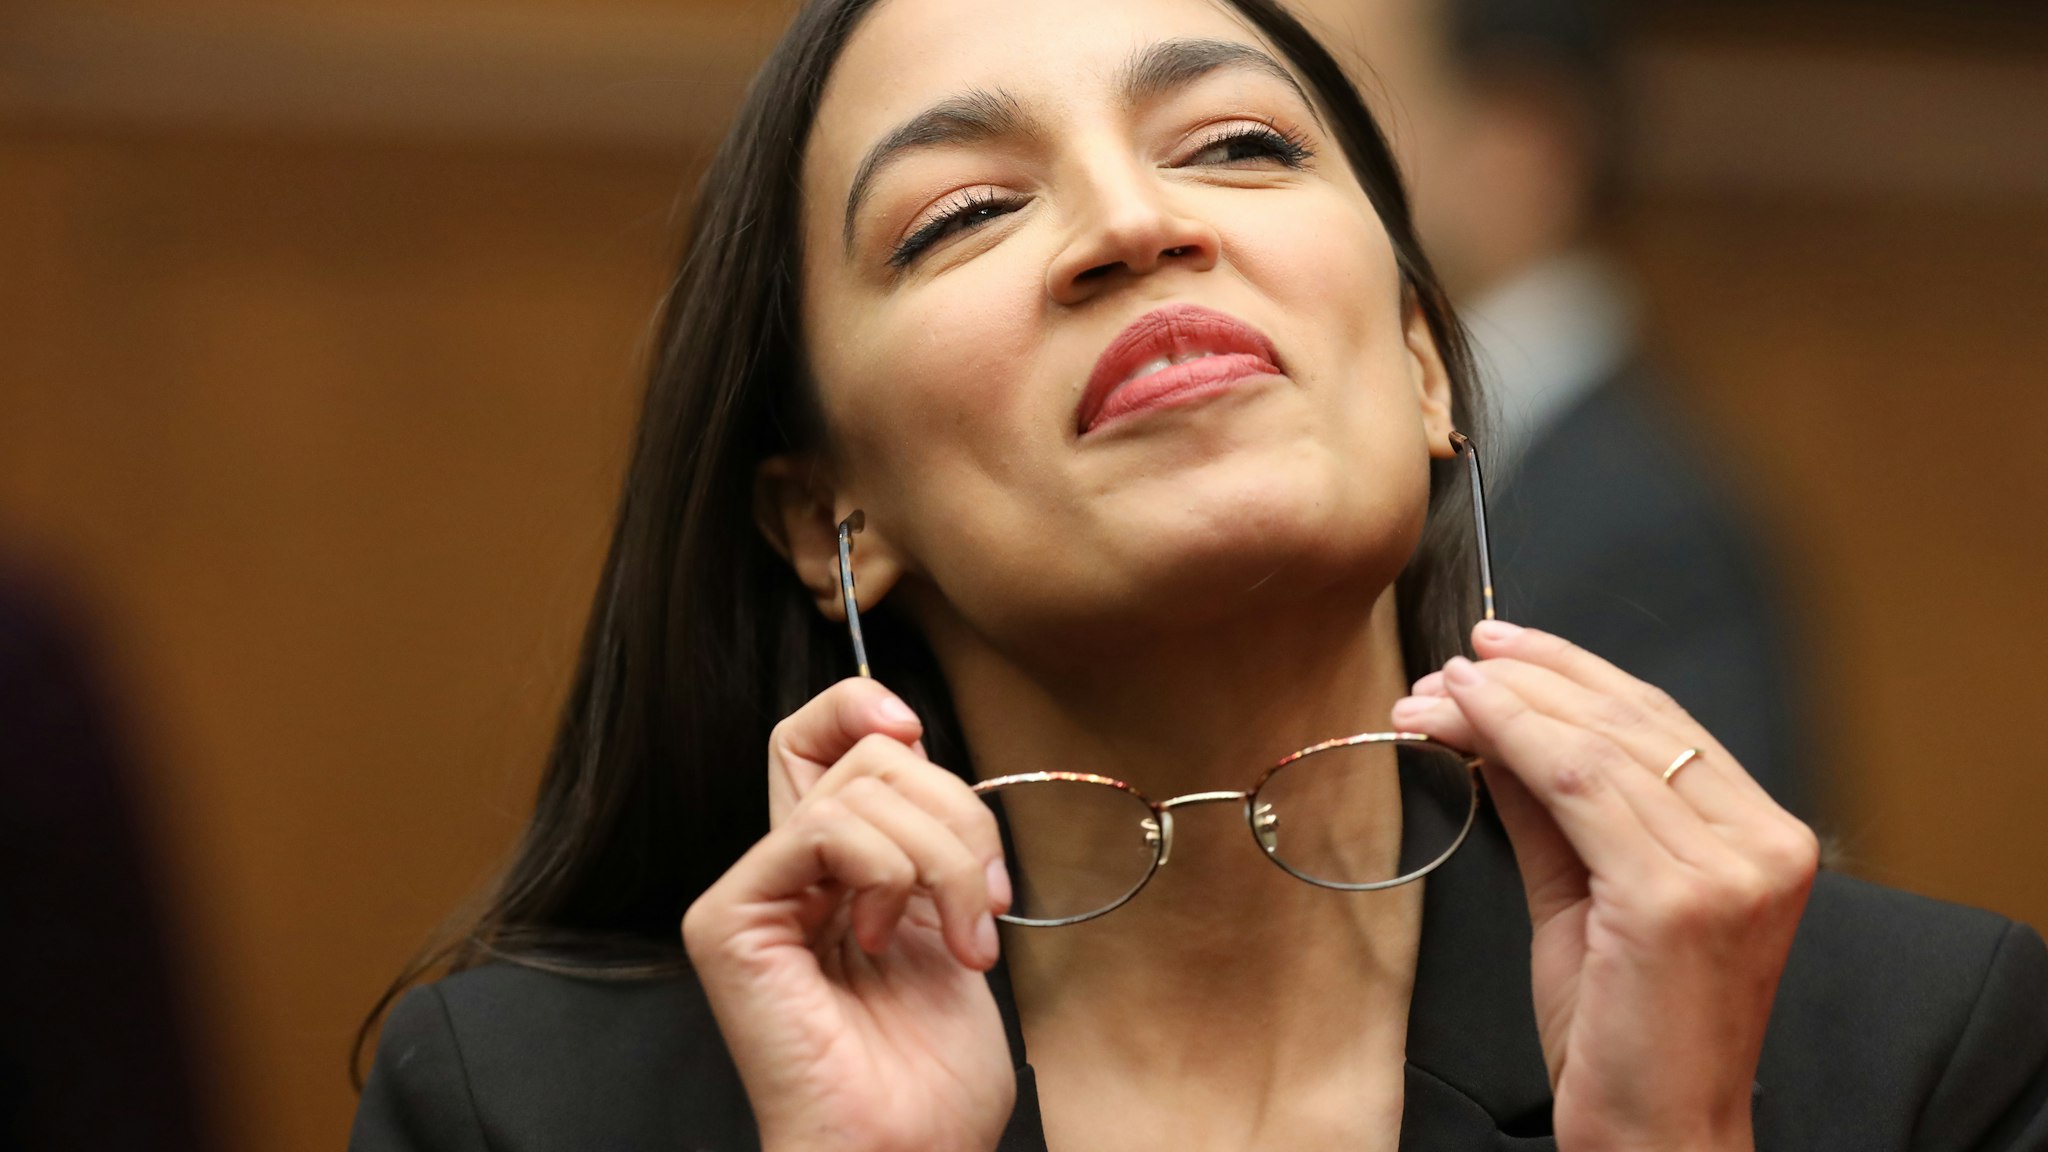 WASHINGTON, DC - OCTOBER 23: House Financial Services Committee member Rep. Alexandria Ocasio-Cortez (D-NY) puts on her glasses as the committee takes a break in the testimony of Facebook co-founder and CEO Mark Zuckerberg in the Rayburn House Office Building on Capitol Hill October 23, 2019 in Washington, DC. Zuckerberg testified about Facebook's proposed cryptocurrency Libra, how his company will handle false and misleading information by political leaders during the 2020 campaign and how it handles its users’ data and privacy.